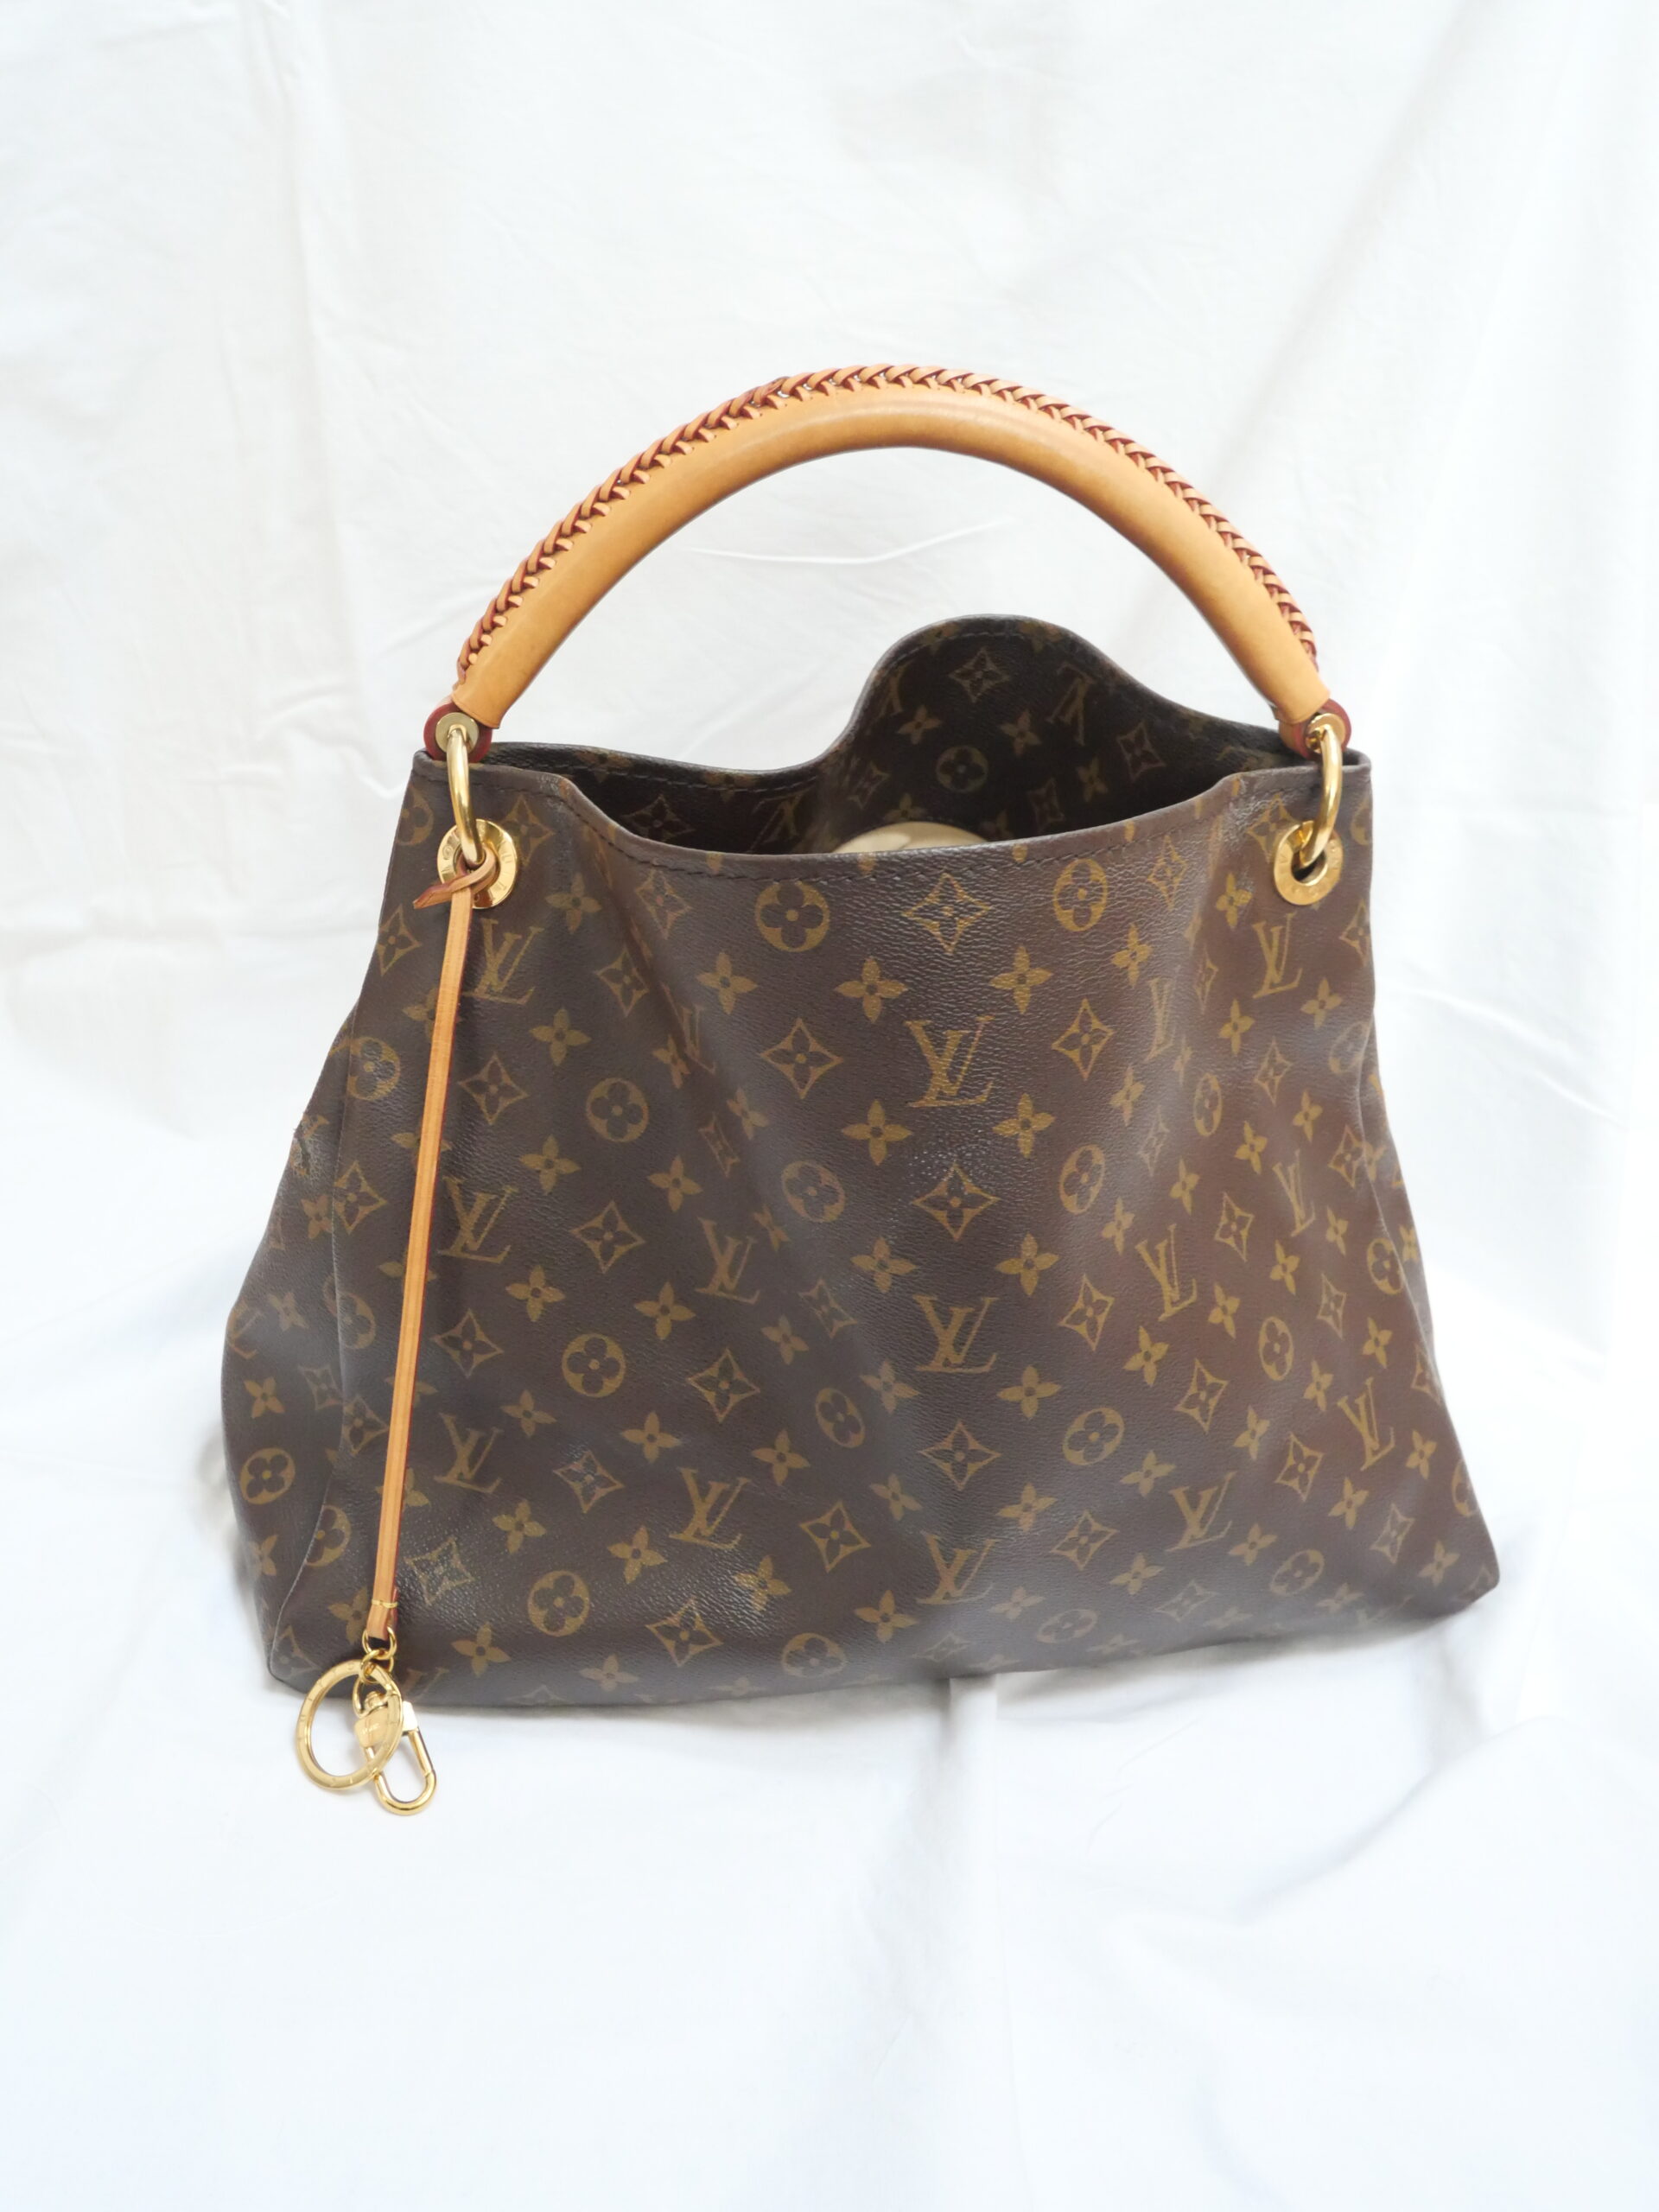 FREE Louis Vuitton Date Code Check - Best Online Authenticator – Bagaholic